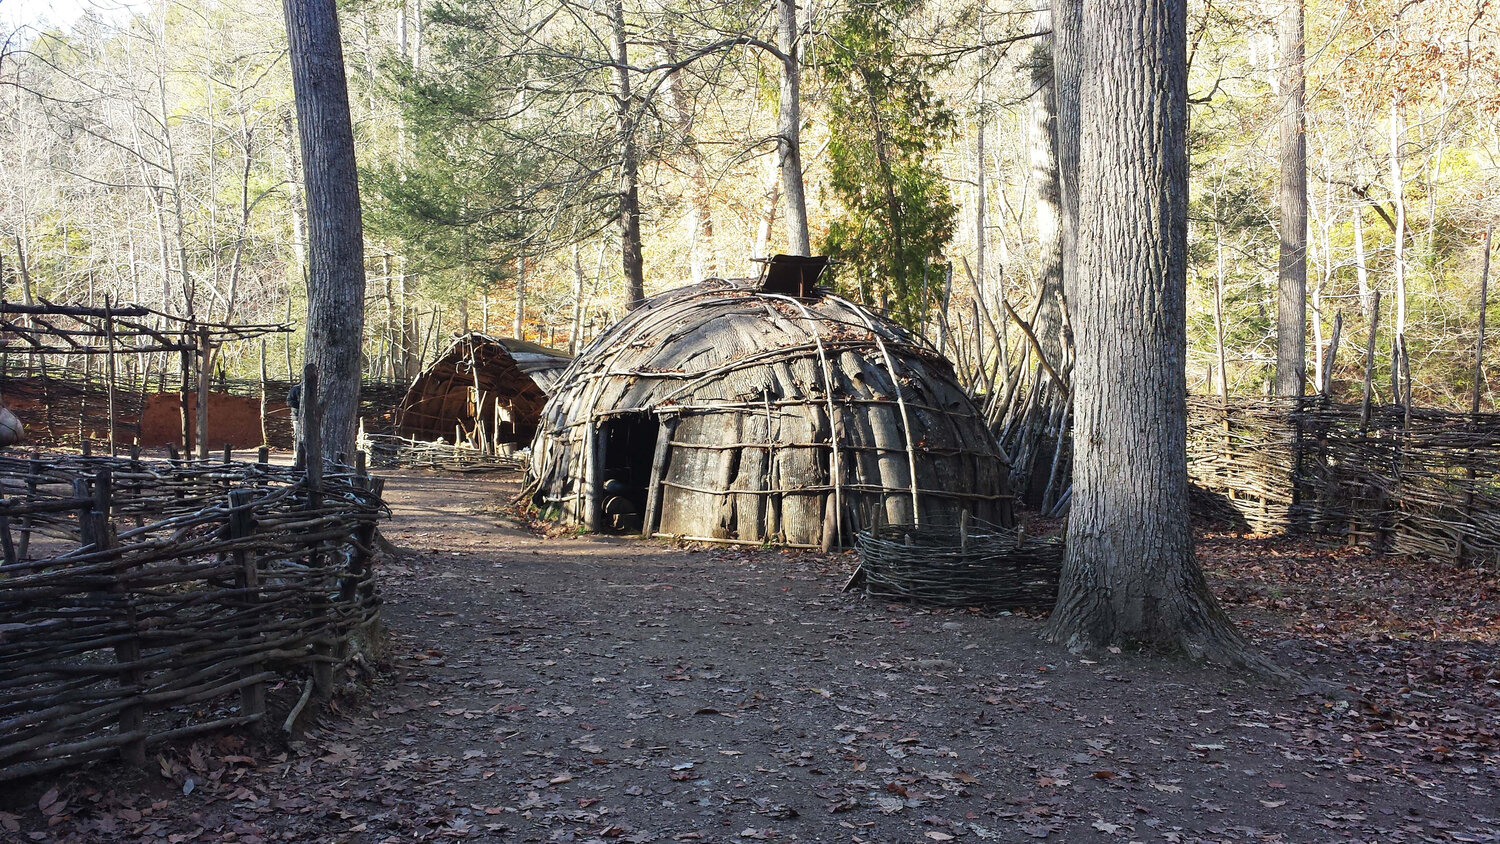 Example of an American Indian Dwelling.